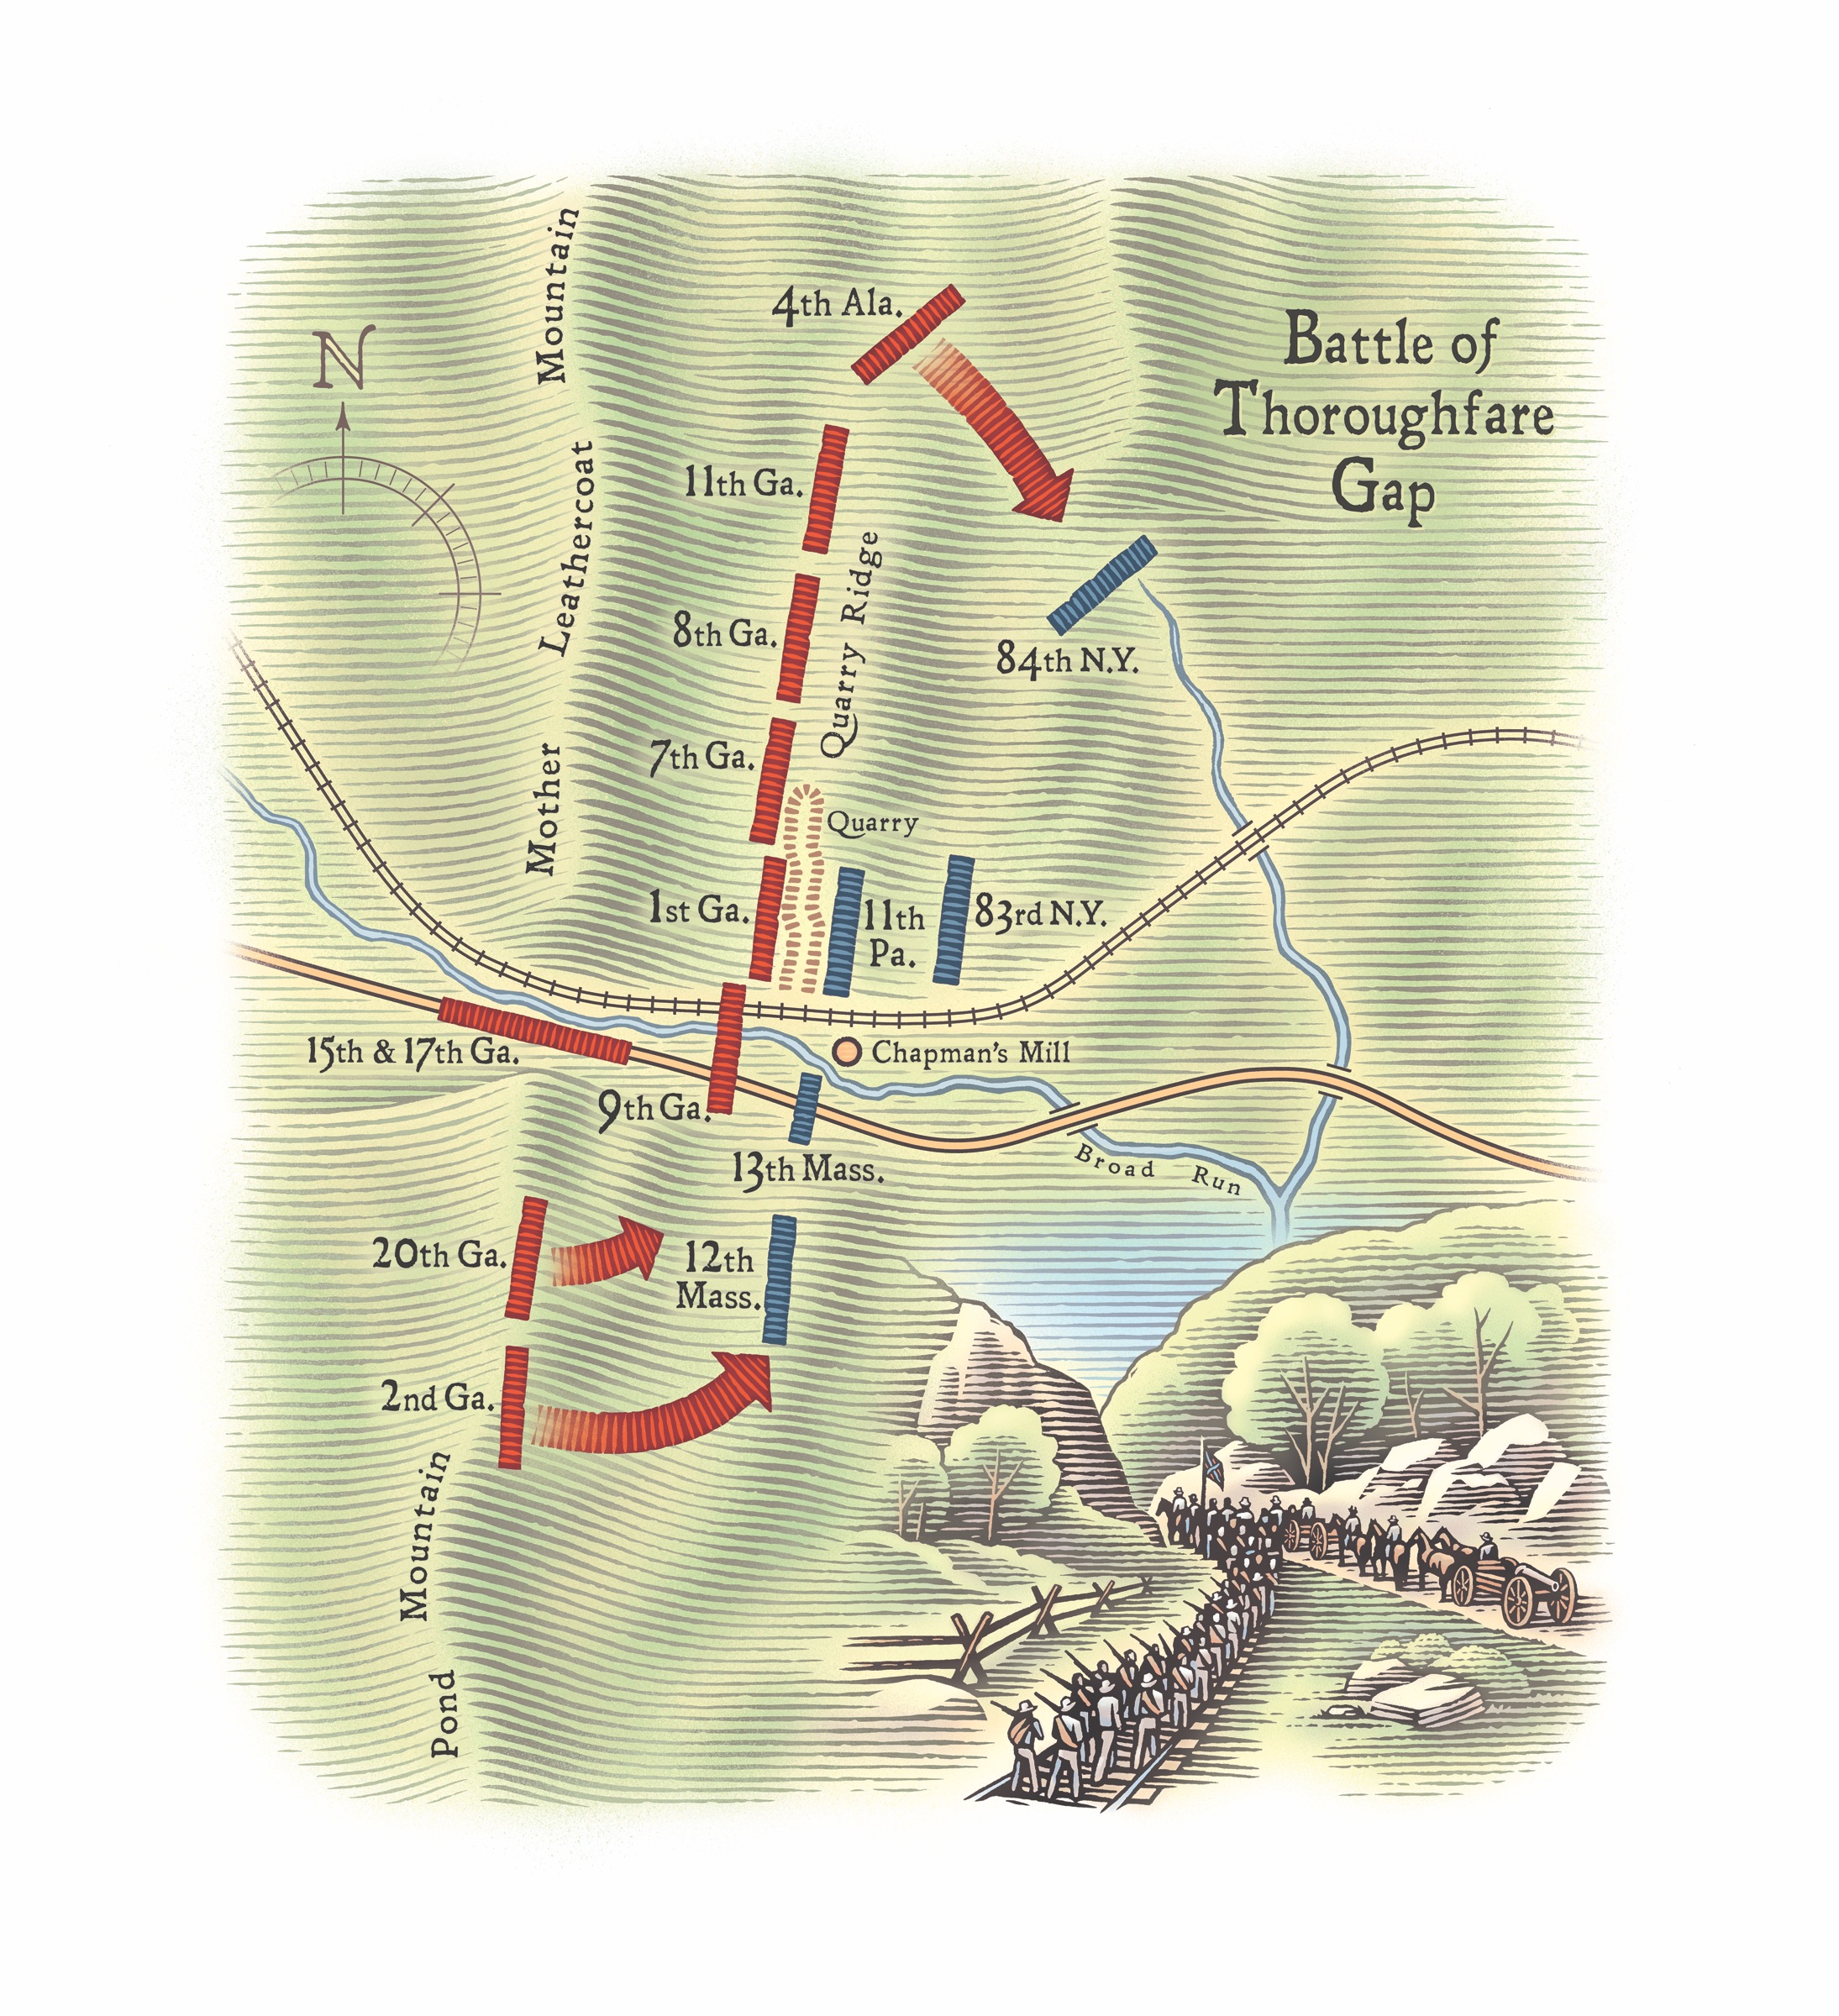  the Battle of Thoroughfare Gap (also known as the Battle of Chapman’s Mill) opened the way for Longstreet, after forcing Pope’s army to retreat, to reunite with Jackson and Lee. (Erwin Sherman Illustration)